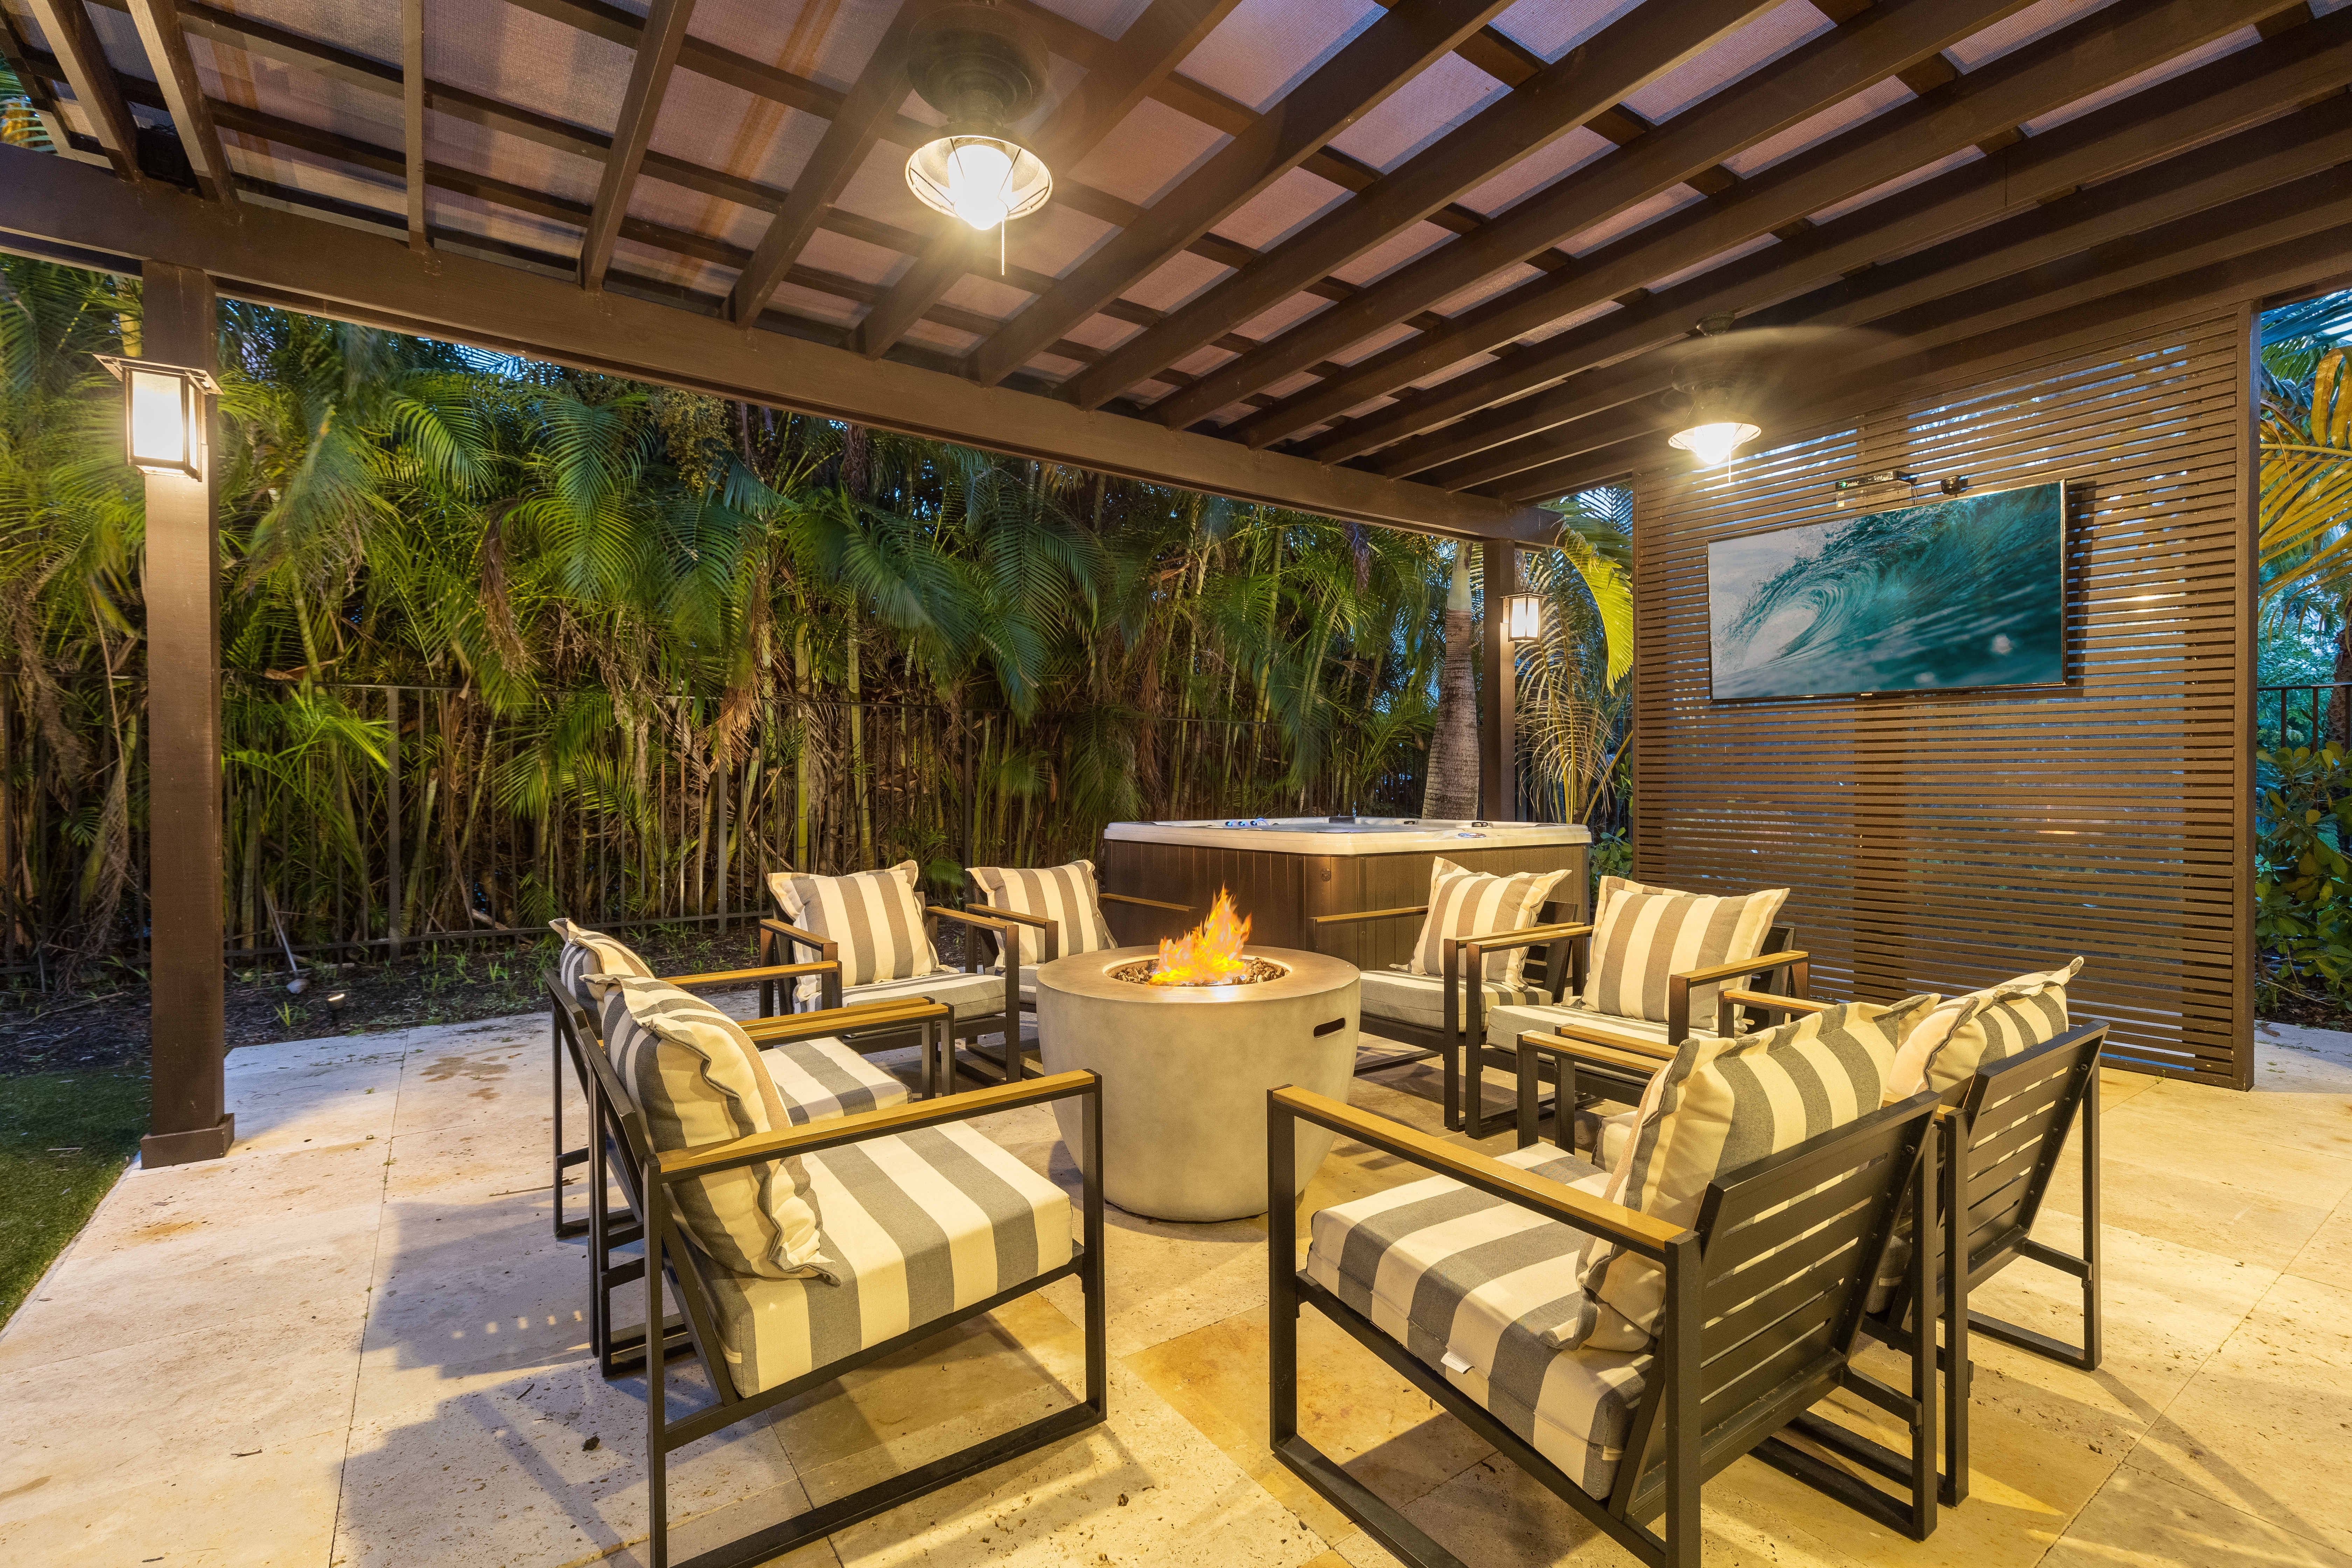 Outdoor firepit with furniture and outdoor TV.